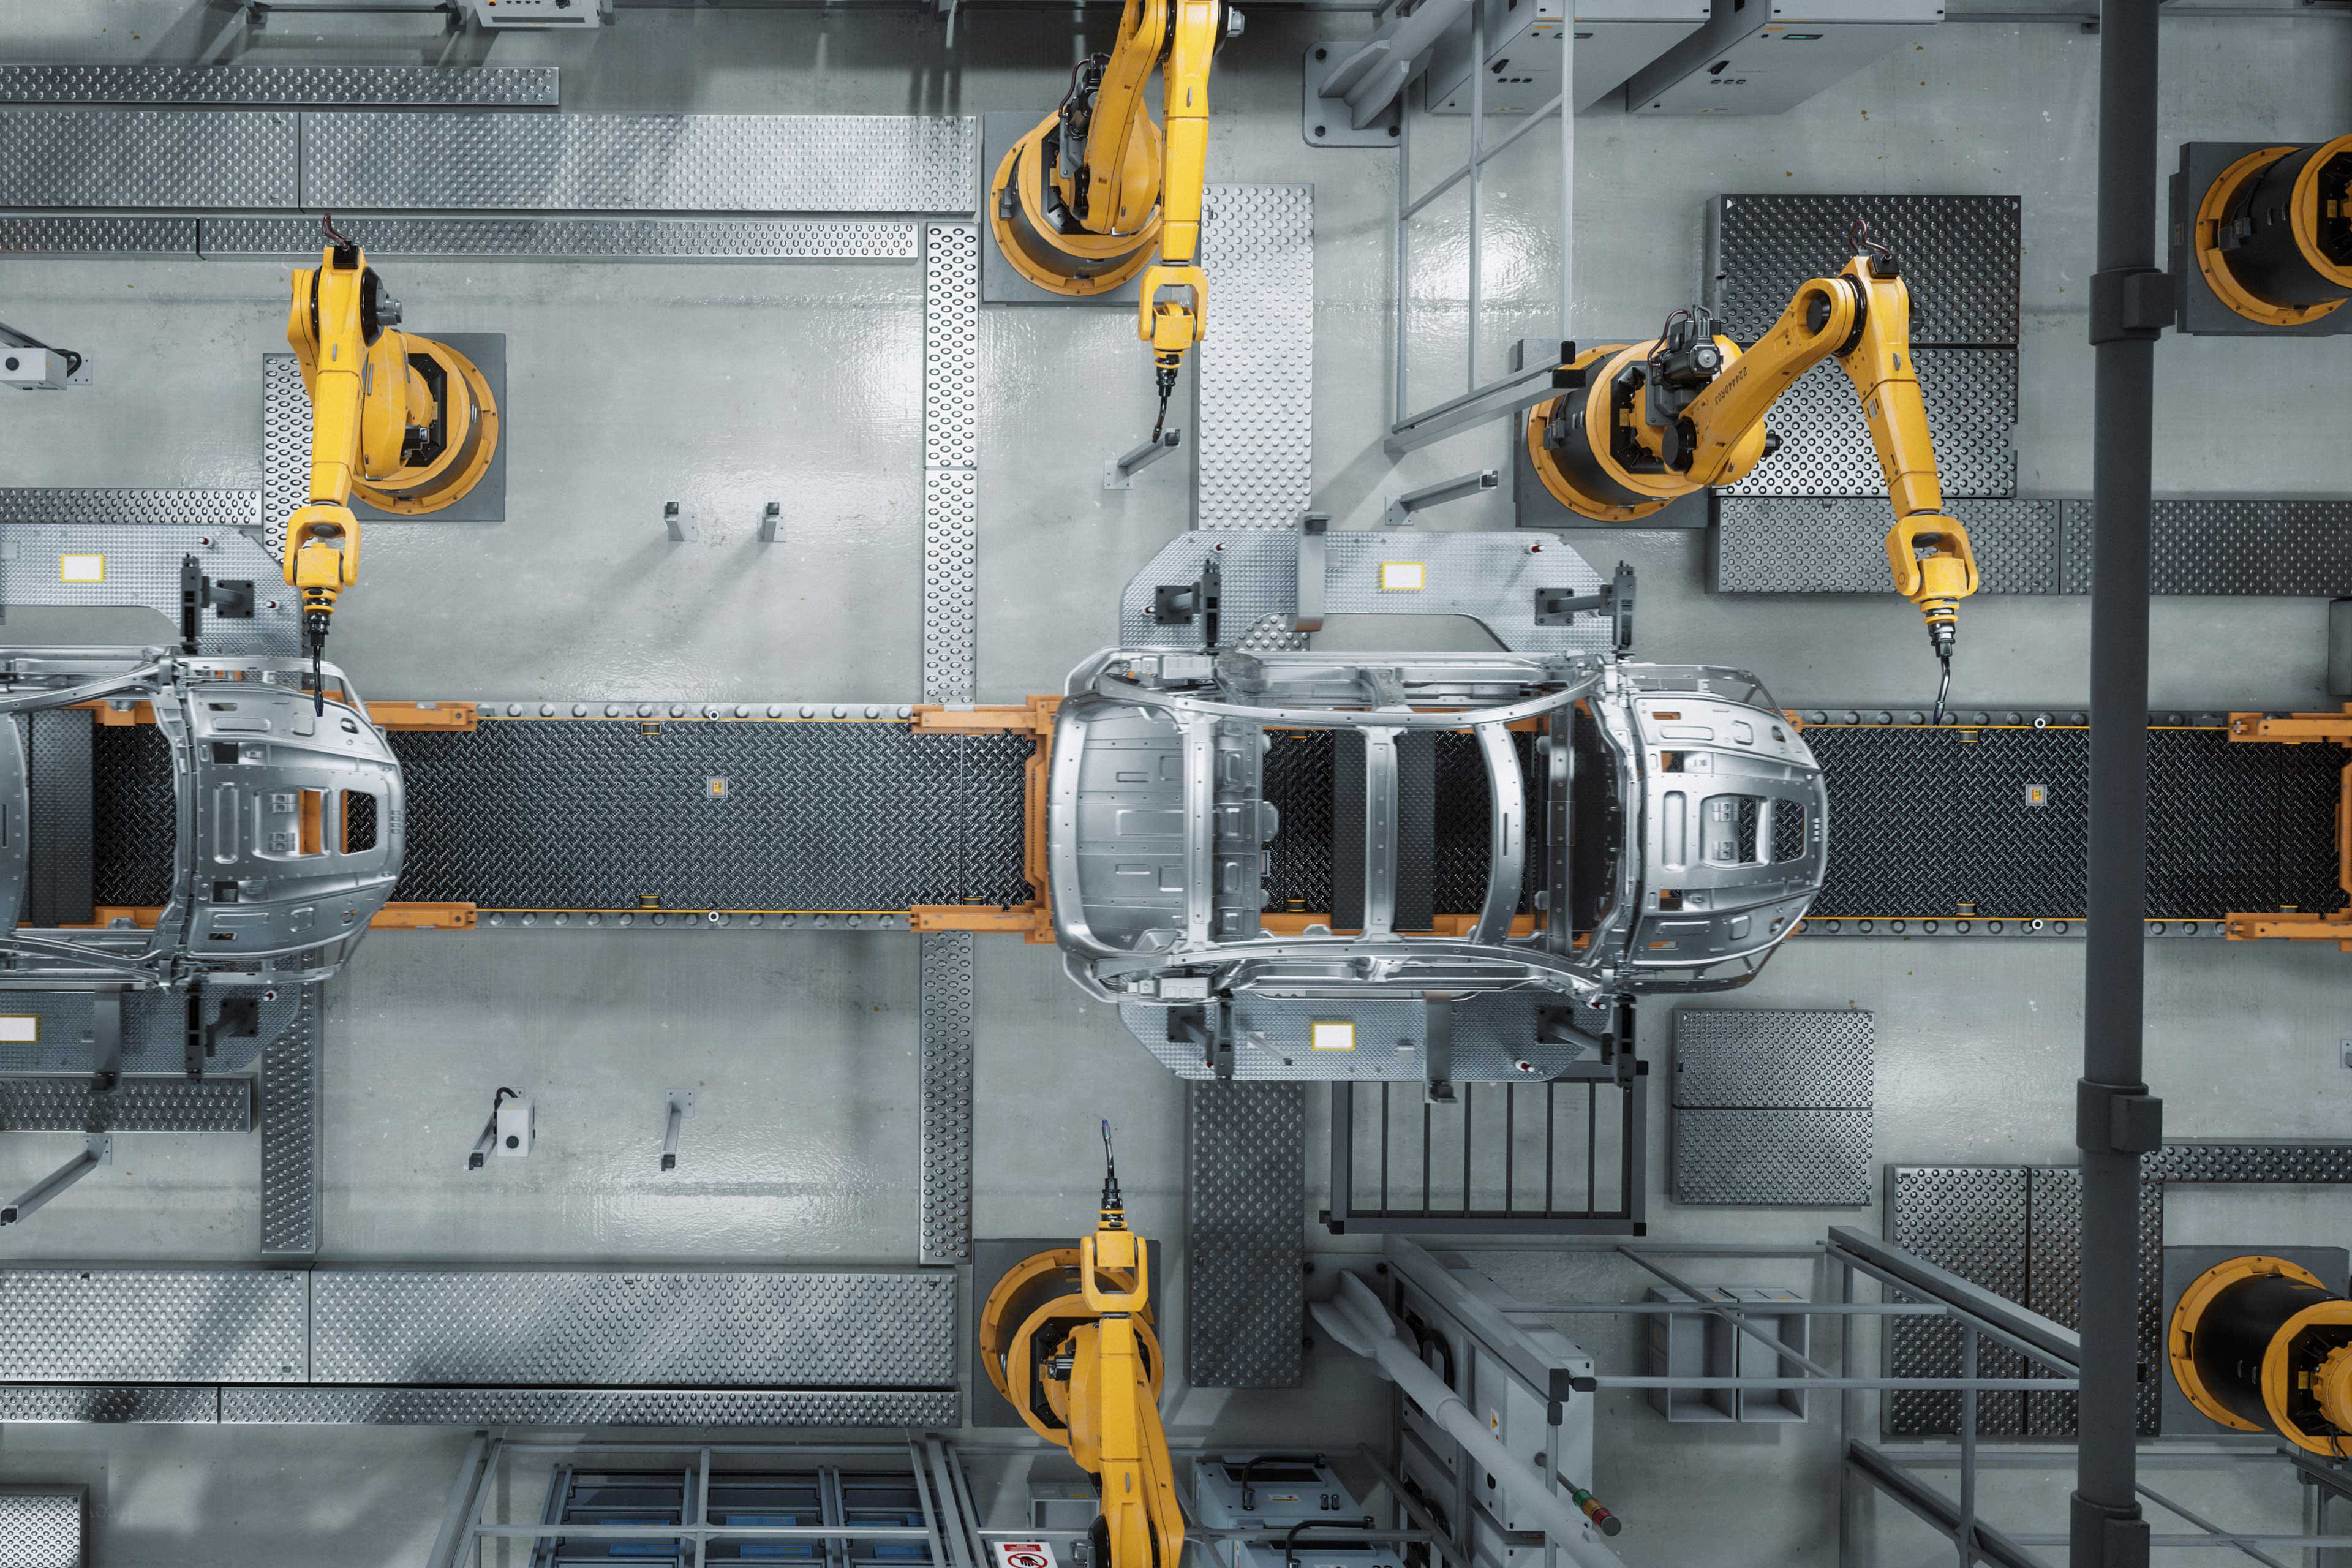 Automated Robot Arm Assembly Line Manufacturing Electric Vehicles